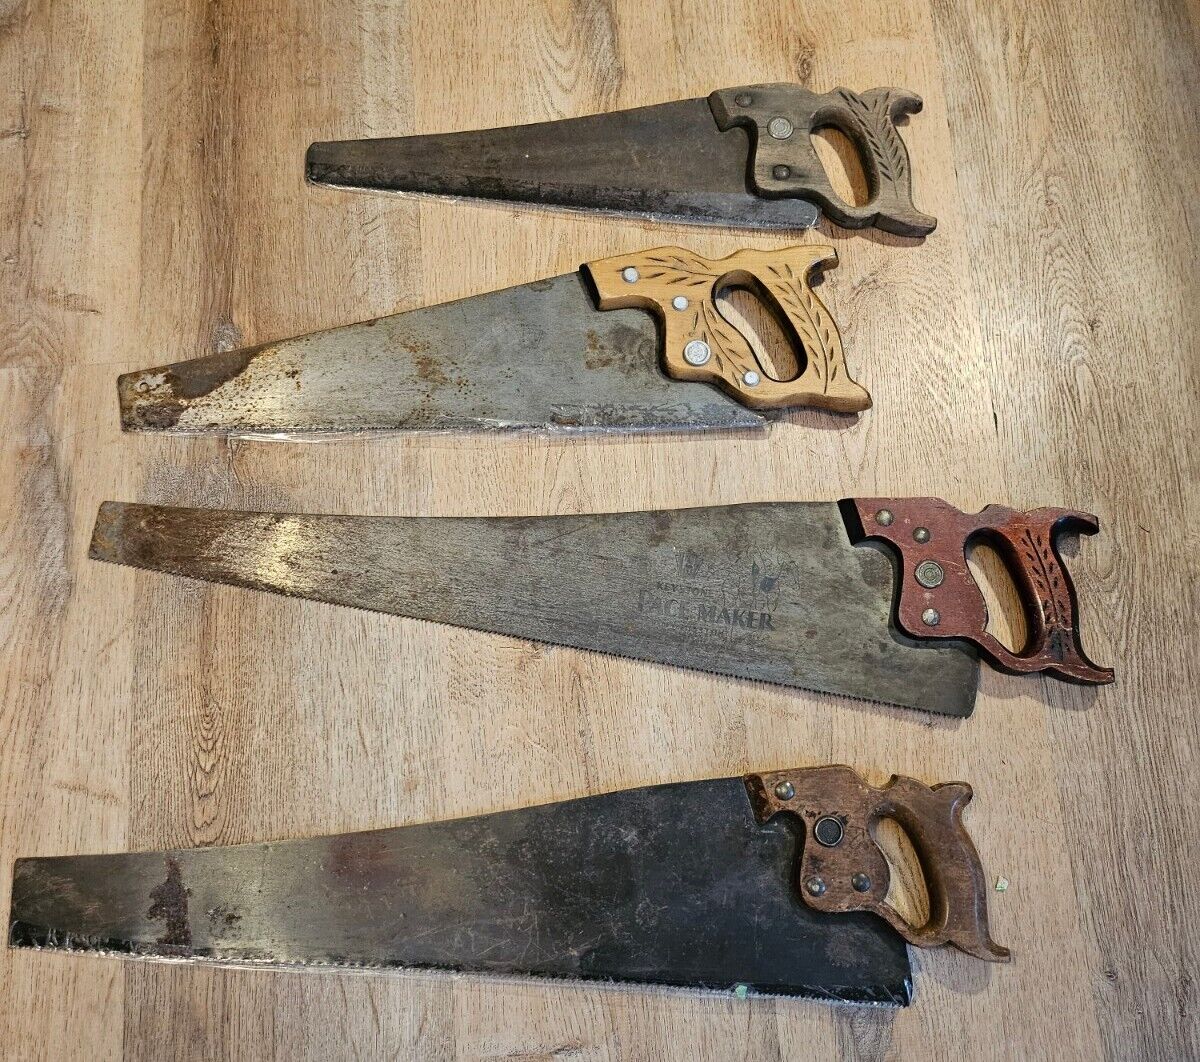 Vtg Disston Hand Saw Lot of 4 Wood Handles, Carpentry, Woodworking